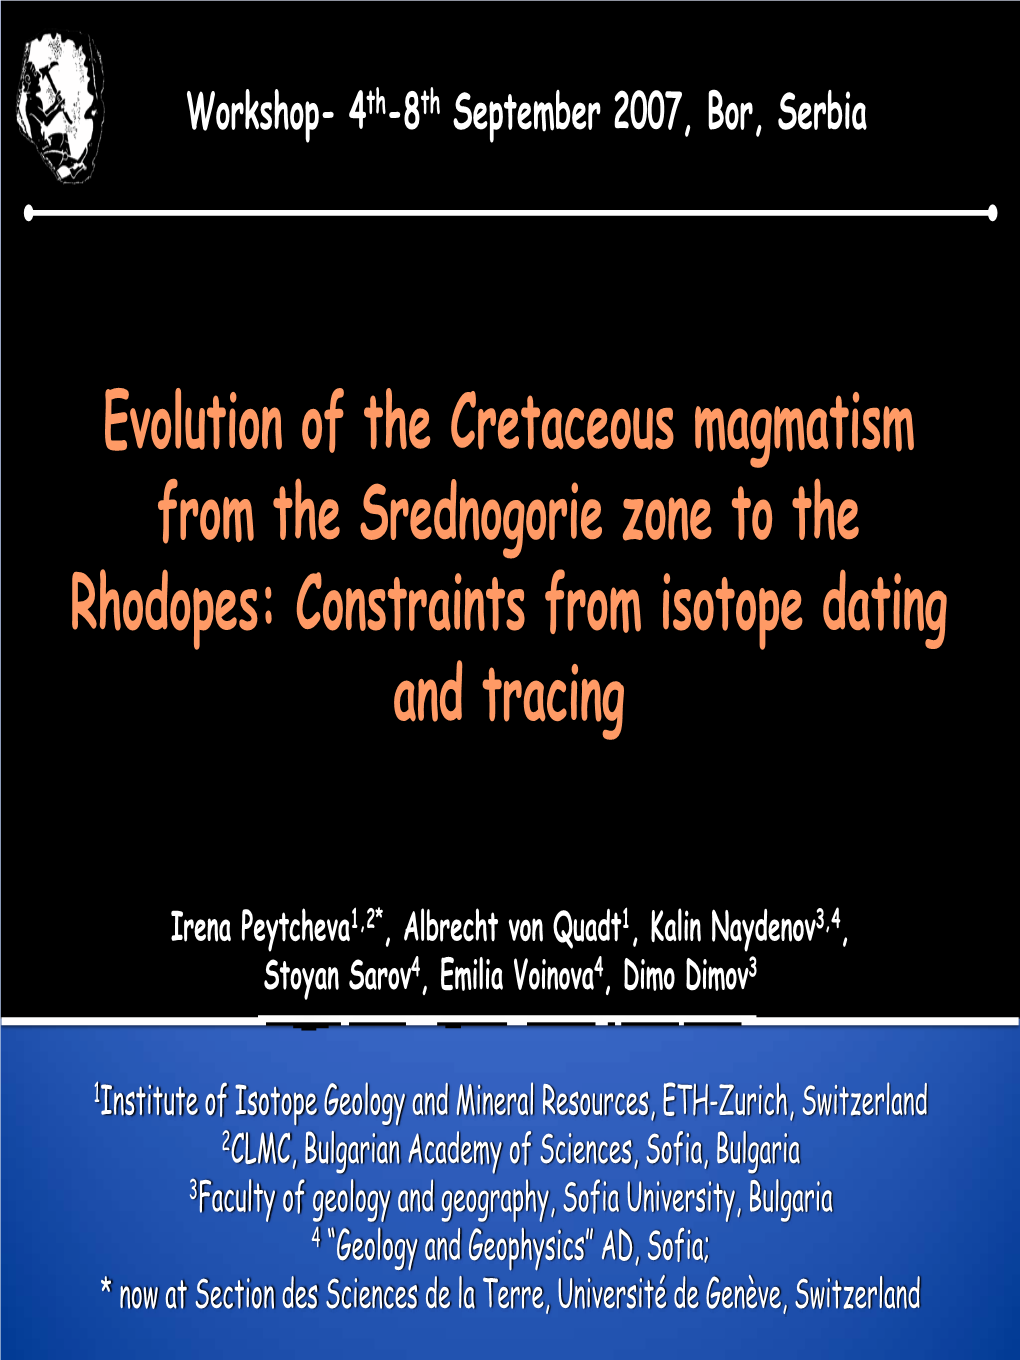 Evolution of the Cretaceous Magmatism from the Srednogorie Zone to the Rhodopes, Bulgaria